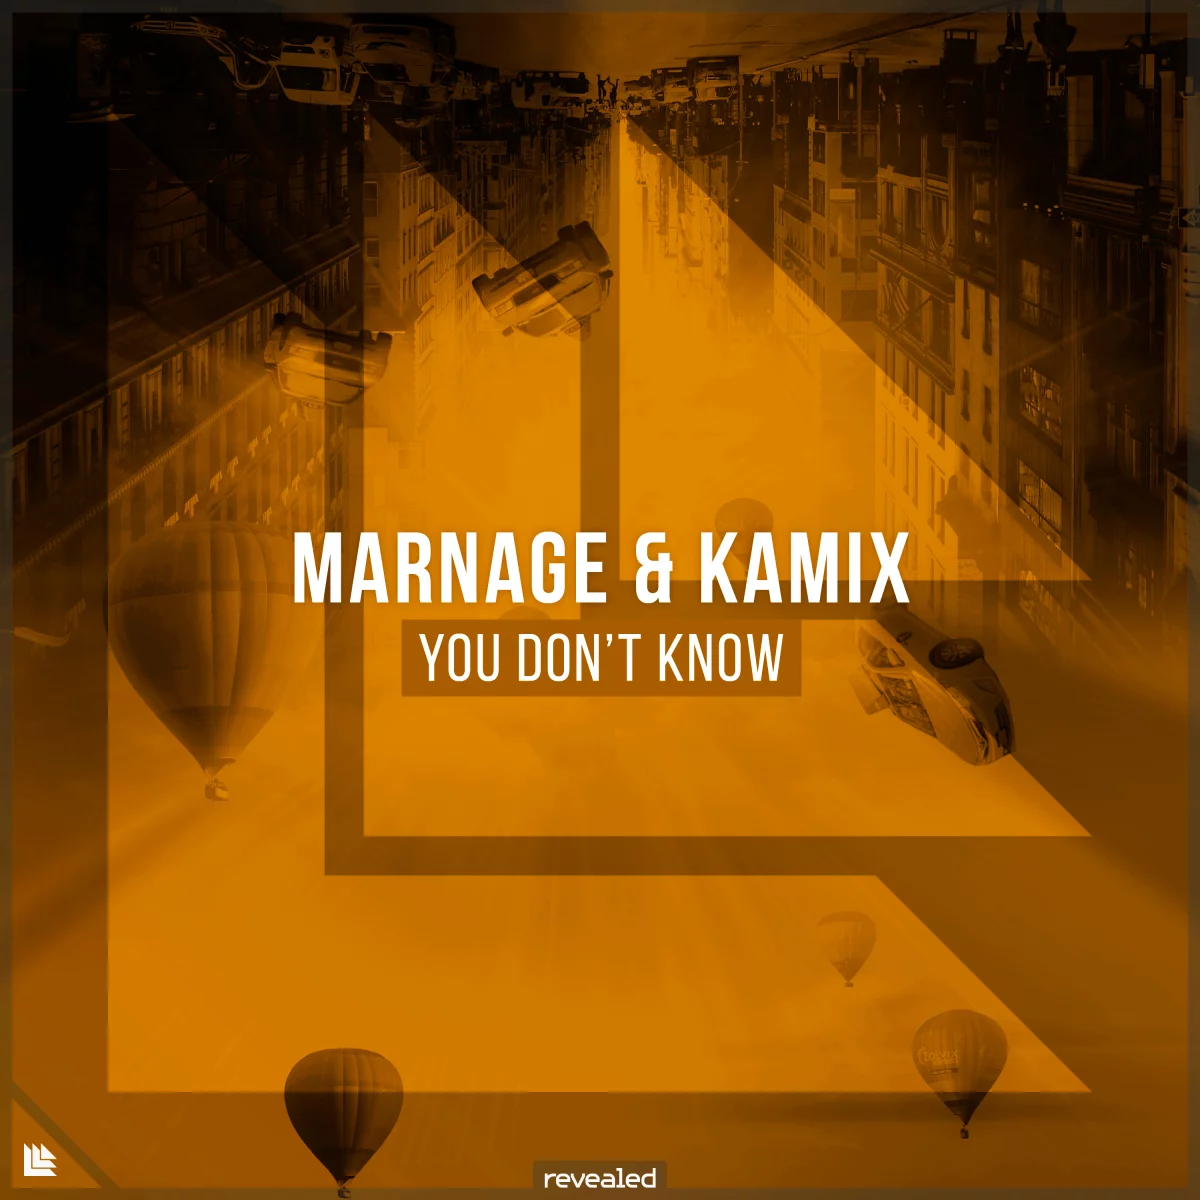 You Don't Know - Marnage⁠ Kamix⁠ 